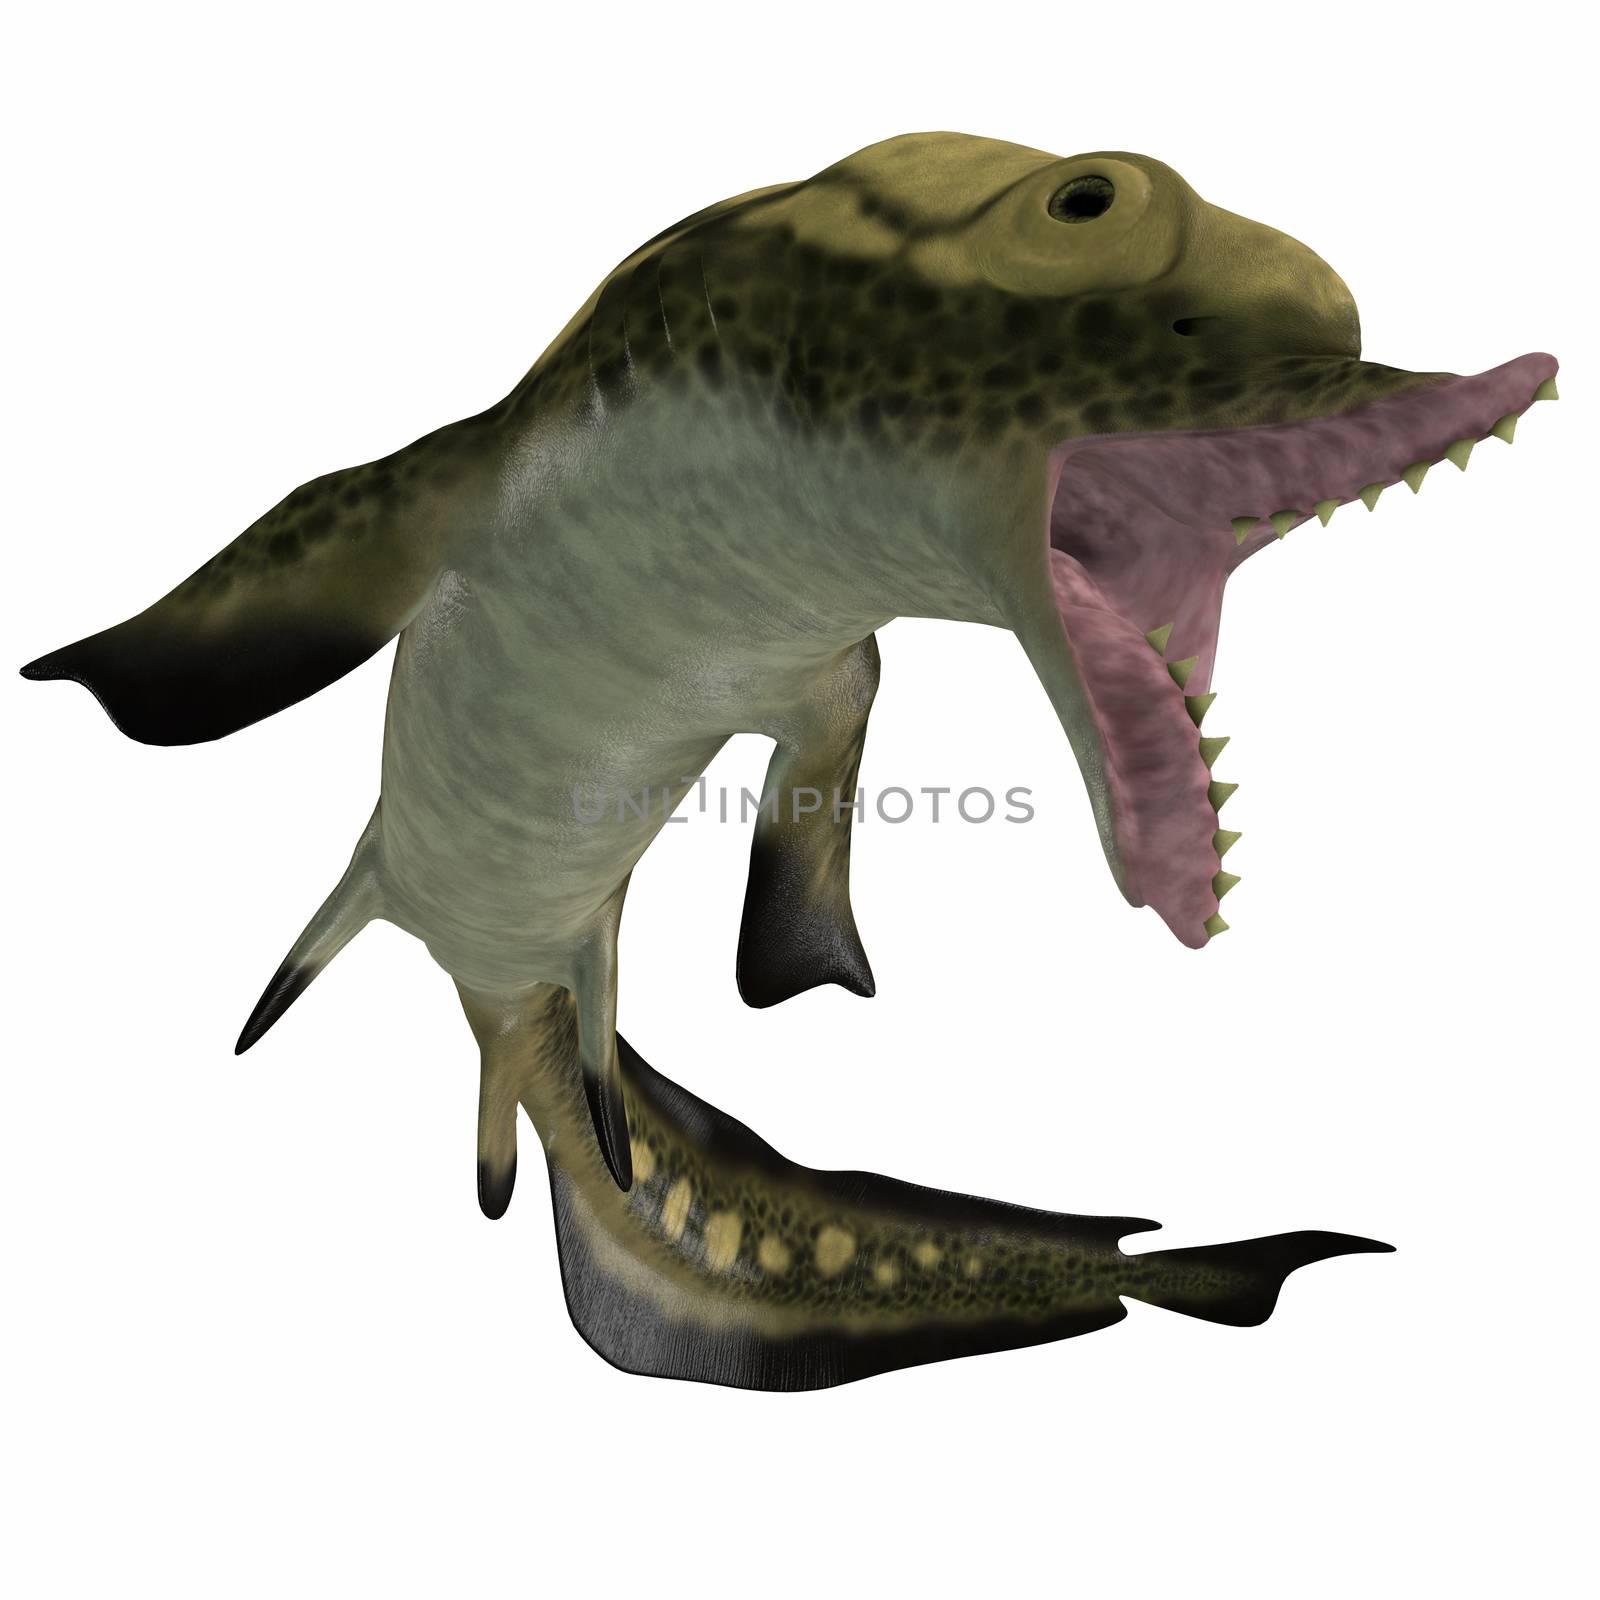 Edestus is a prehistoric shark that lived in the Carboniferous Period of England, Russia and North America.